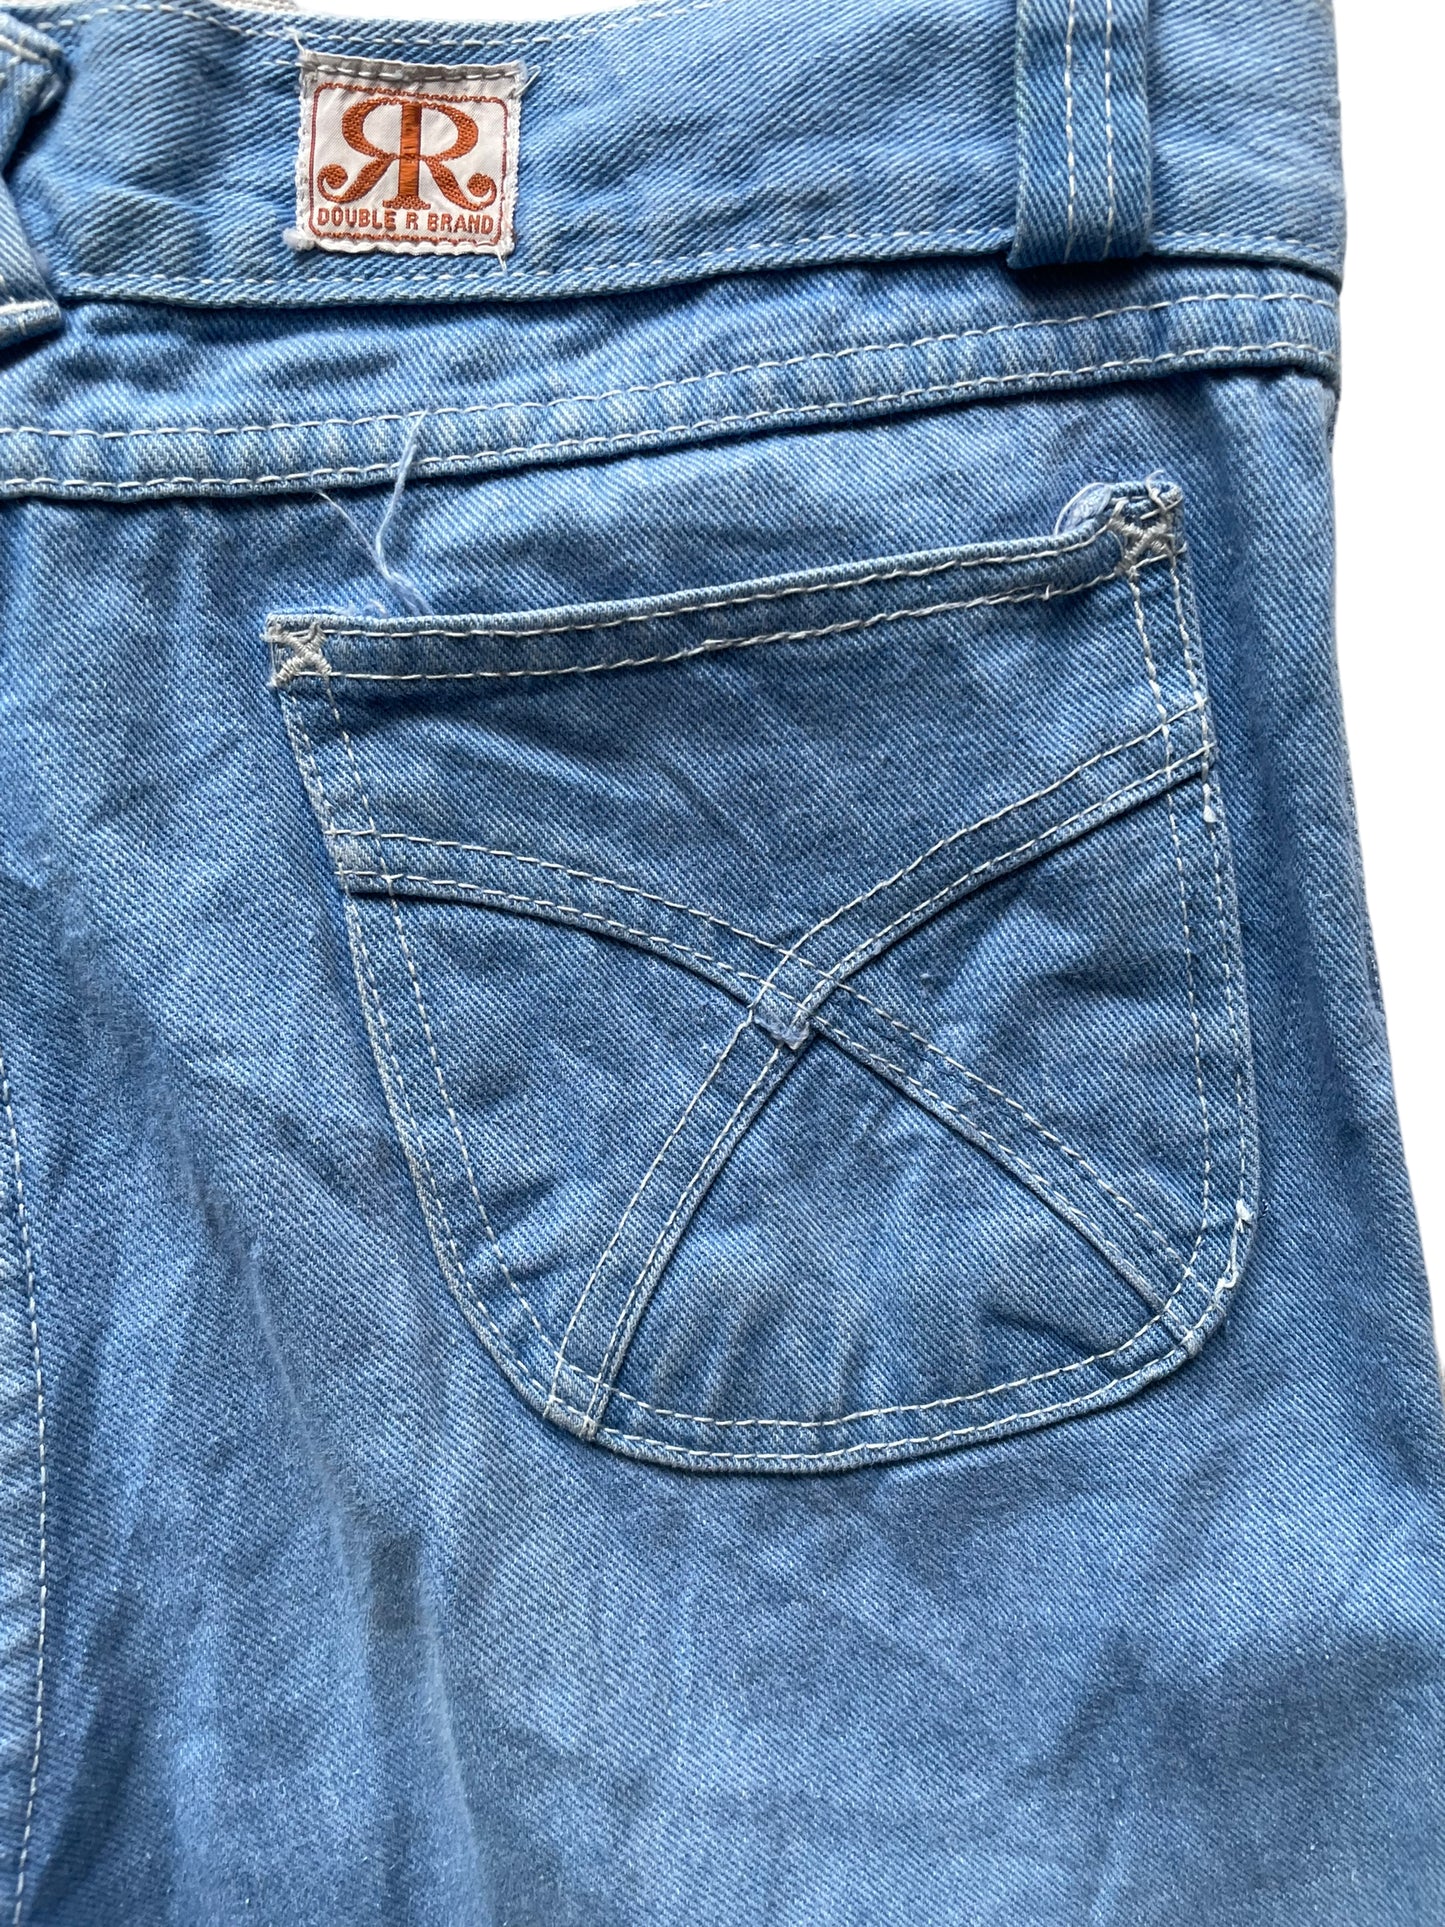 Back pocket detail view of Vintage Double R Flares